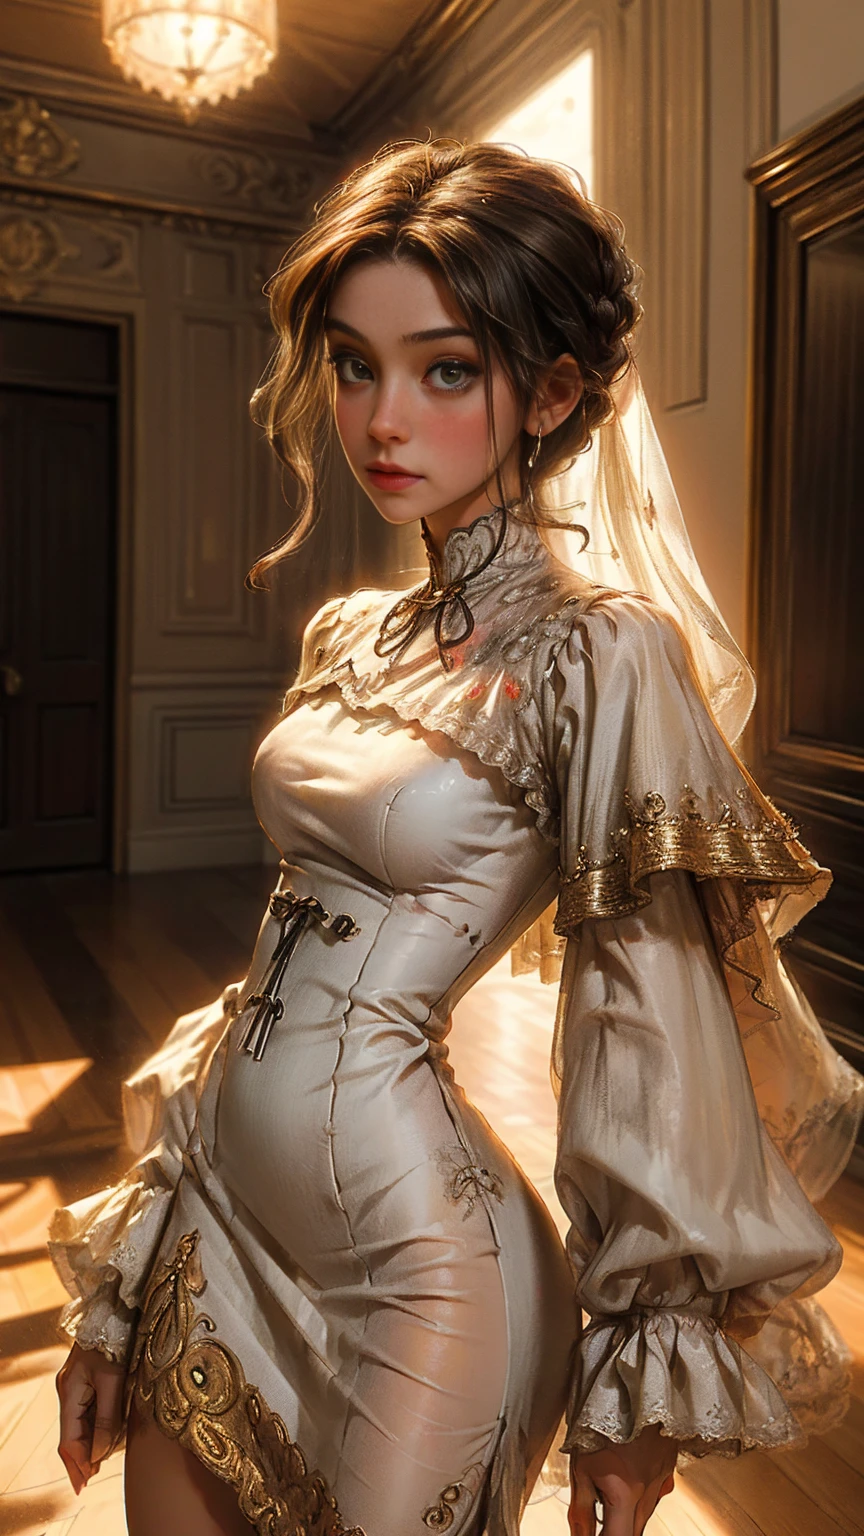 ((beautiful detailed maiden dressed in a beautiful white lace dress, 1800s style:1.5)), elegant mansion from the 1800s interior, hyper detailed, 8k, high quality, ultra realistic, realistic lighting, photorealistic, cinematographic, very detailed face and eyes, beautiful detailed dress, intricate details, chiaroscuro lighting, dramatic shadows, warm color tones, golden hour lighting, ornate decoration, luxury furniture, parquet floors.